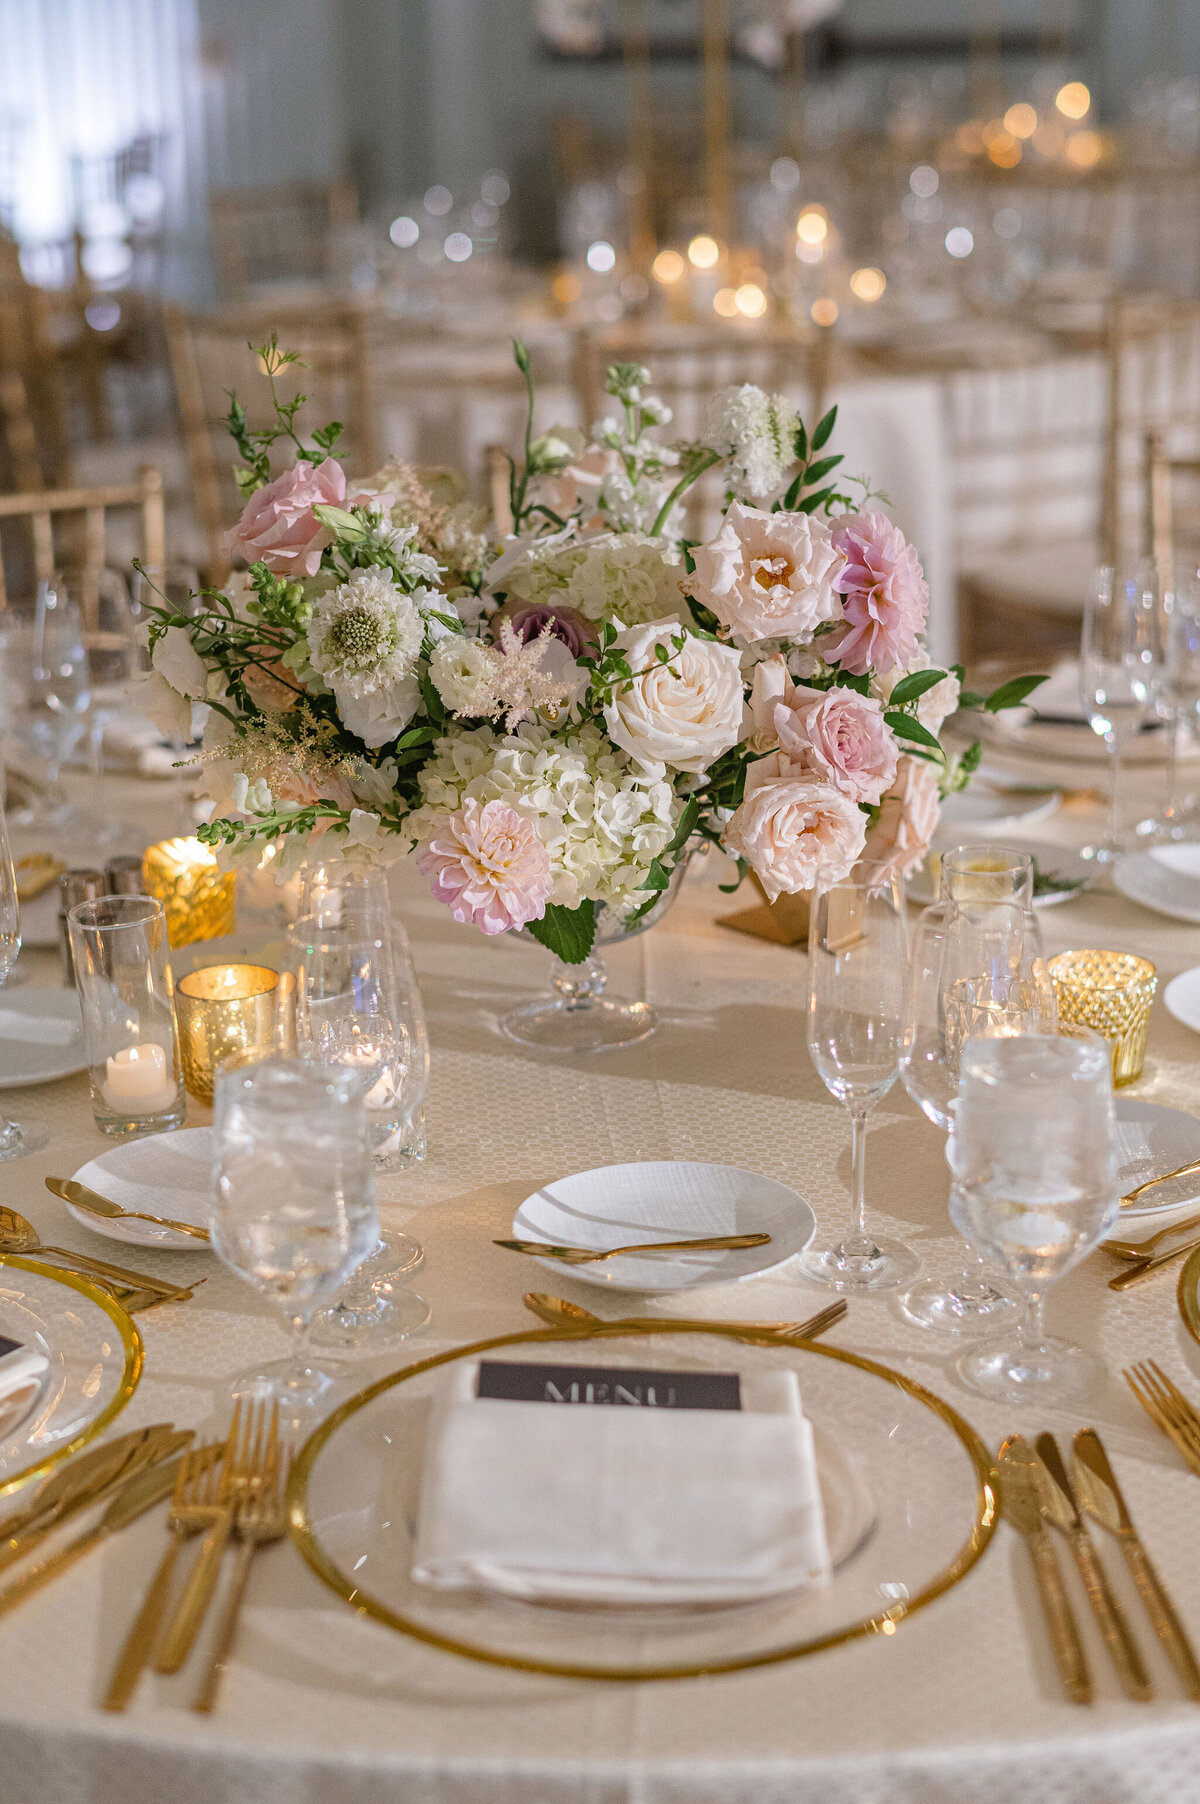 pink and white centerpiece with charger plates and gold flatware